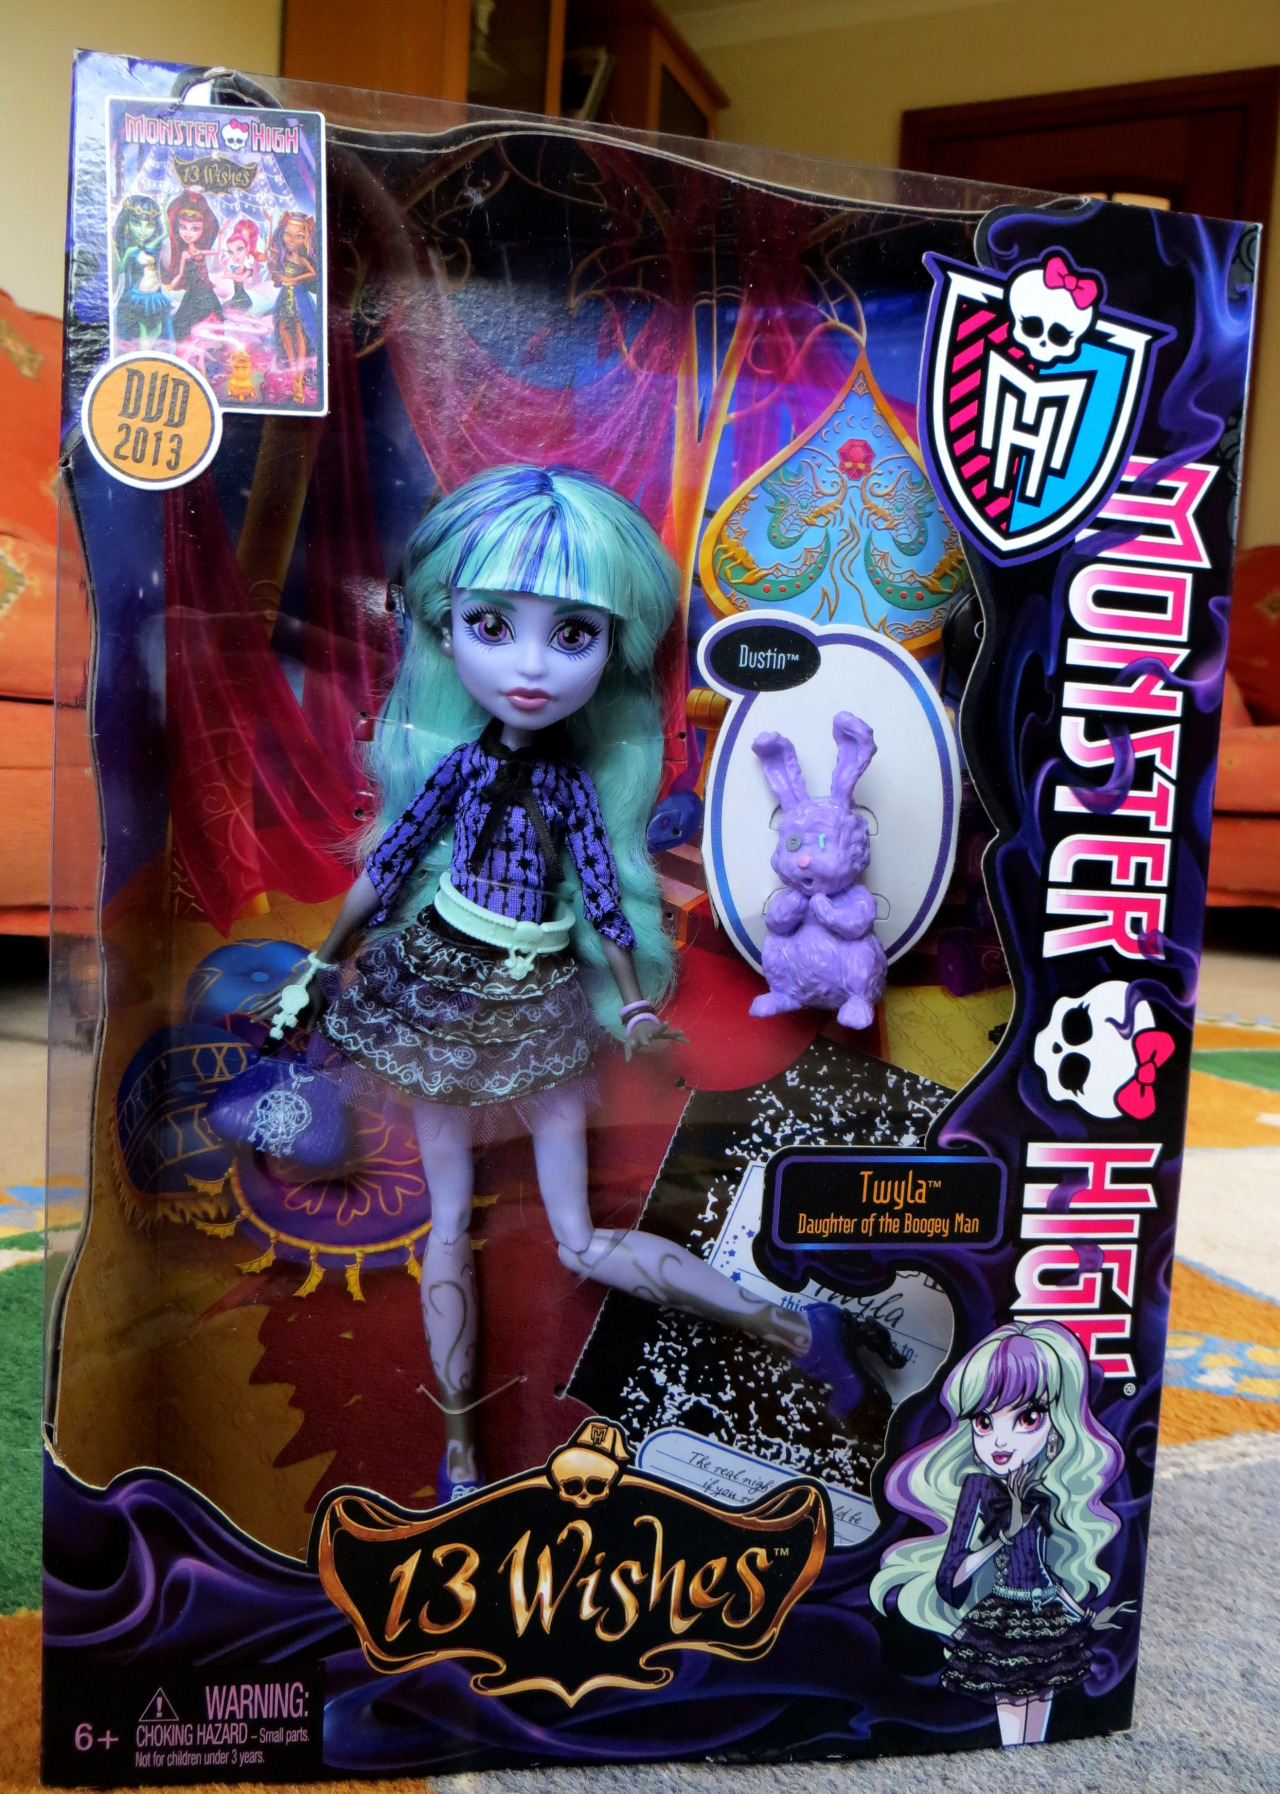 Let&#8217;s talk about Twyla in a nice calm not capslocky internet voice.
FD:SKFGDJLFDSKFD:FGD!!!11oneELEVEN 
So, as I said earlier Argos uk is officially selling 13 wishes now! I got my Twyla today!
She&#8217;s totally stunning! I thought her hair would be a big hard gluey mess but it was totally fluffy and soft after one brush :) Her hair also looks kickass in a pony-tail and I am so keeping it like that. AND HER GLOW IN THE DARK EYES LFJDSFJSD her eyes also glow in the dark which is pretty neat.
I think I shall leave this Twyla as she is for now. I do not want to repaint such a currently rare and glowy doll. Maybe i&#8217;ll buy her a twin when everyones complaining about her shelfwarming. But for now. Perfect. 
Oh also if anyone is wanting detailed pictures of anything send me a wee message and i&#8217;ll get them snapped up for you! :) 